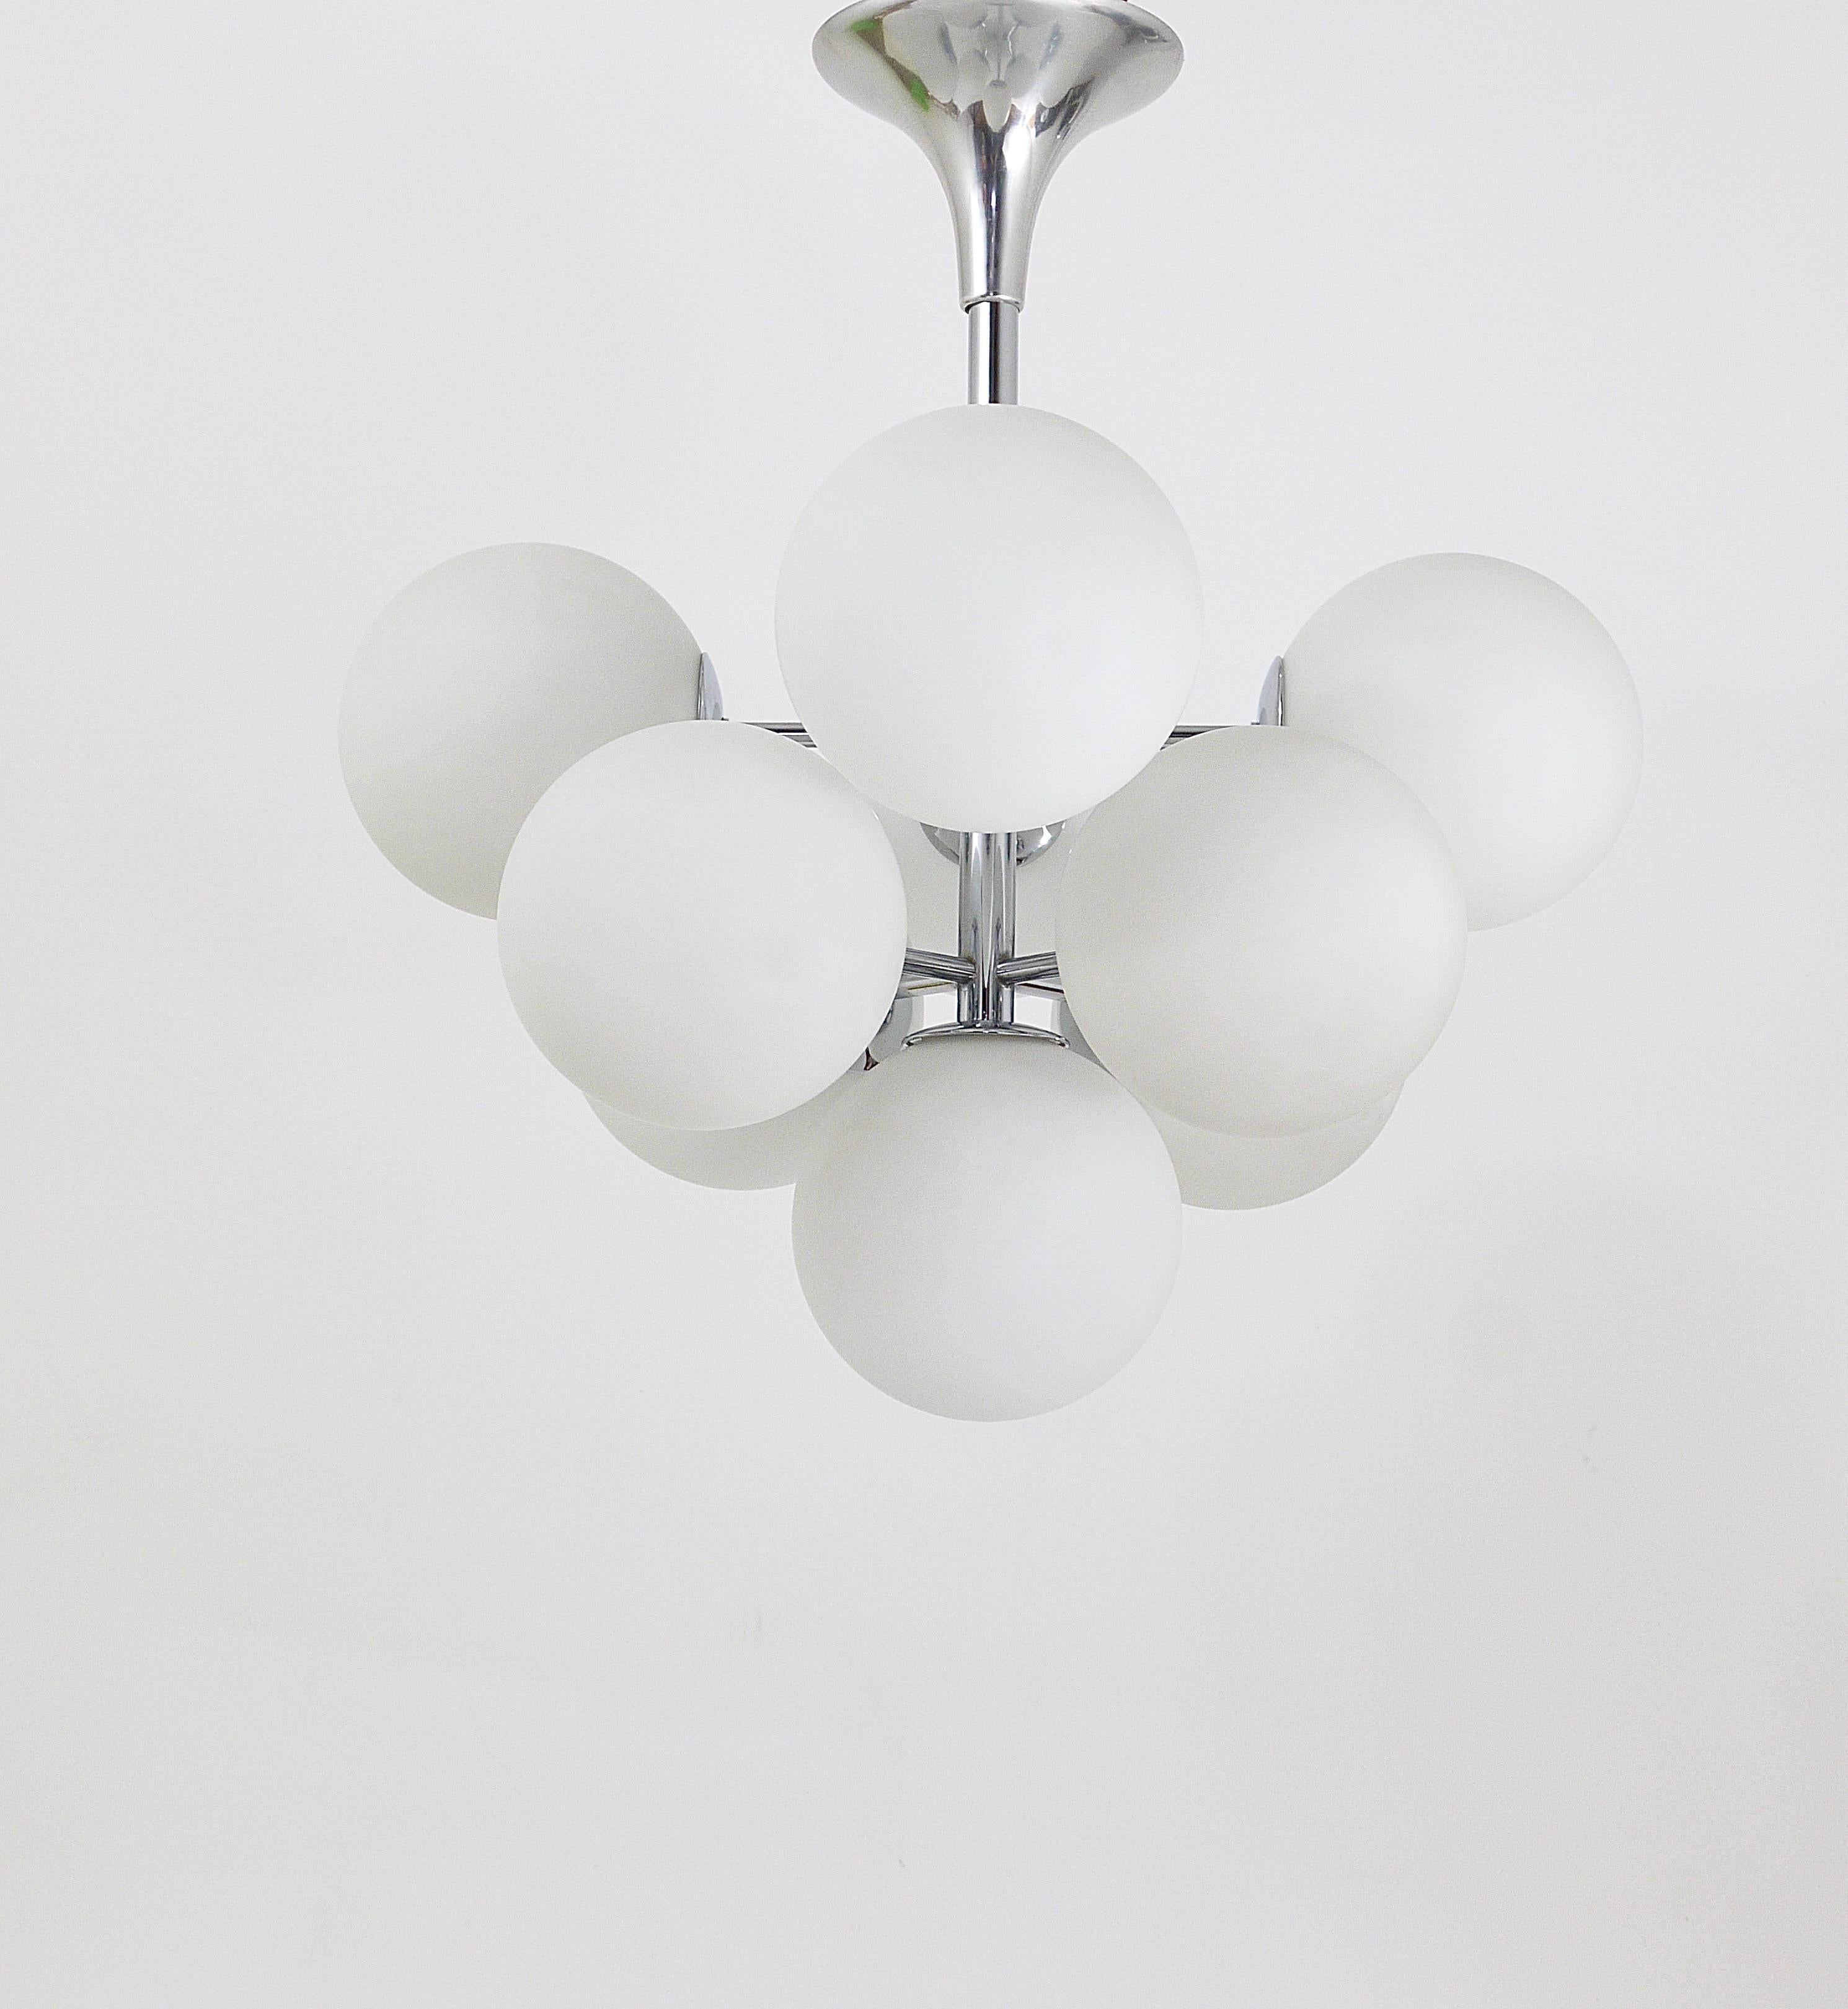 Chromed Atomic Chandelier with White Glass Globes, Temde, Switzerland In Good Condition For Sale In Vienna, AT